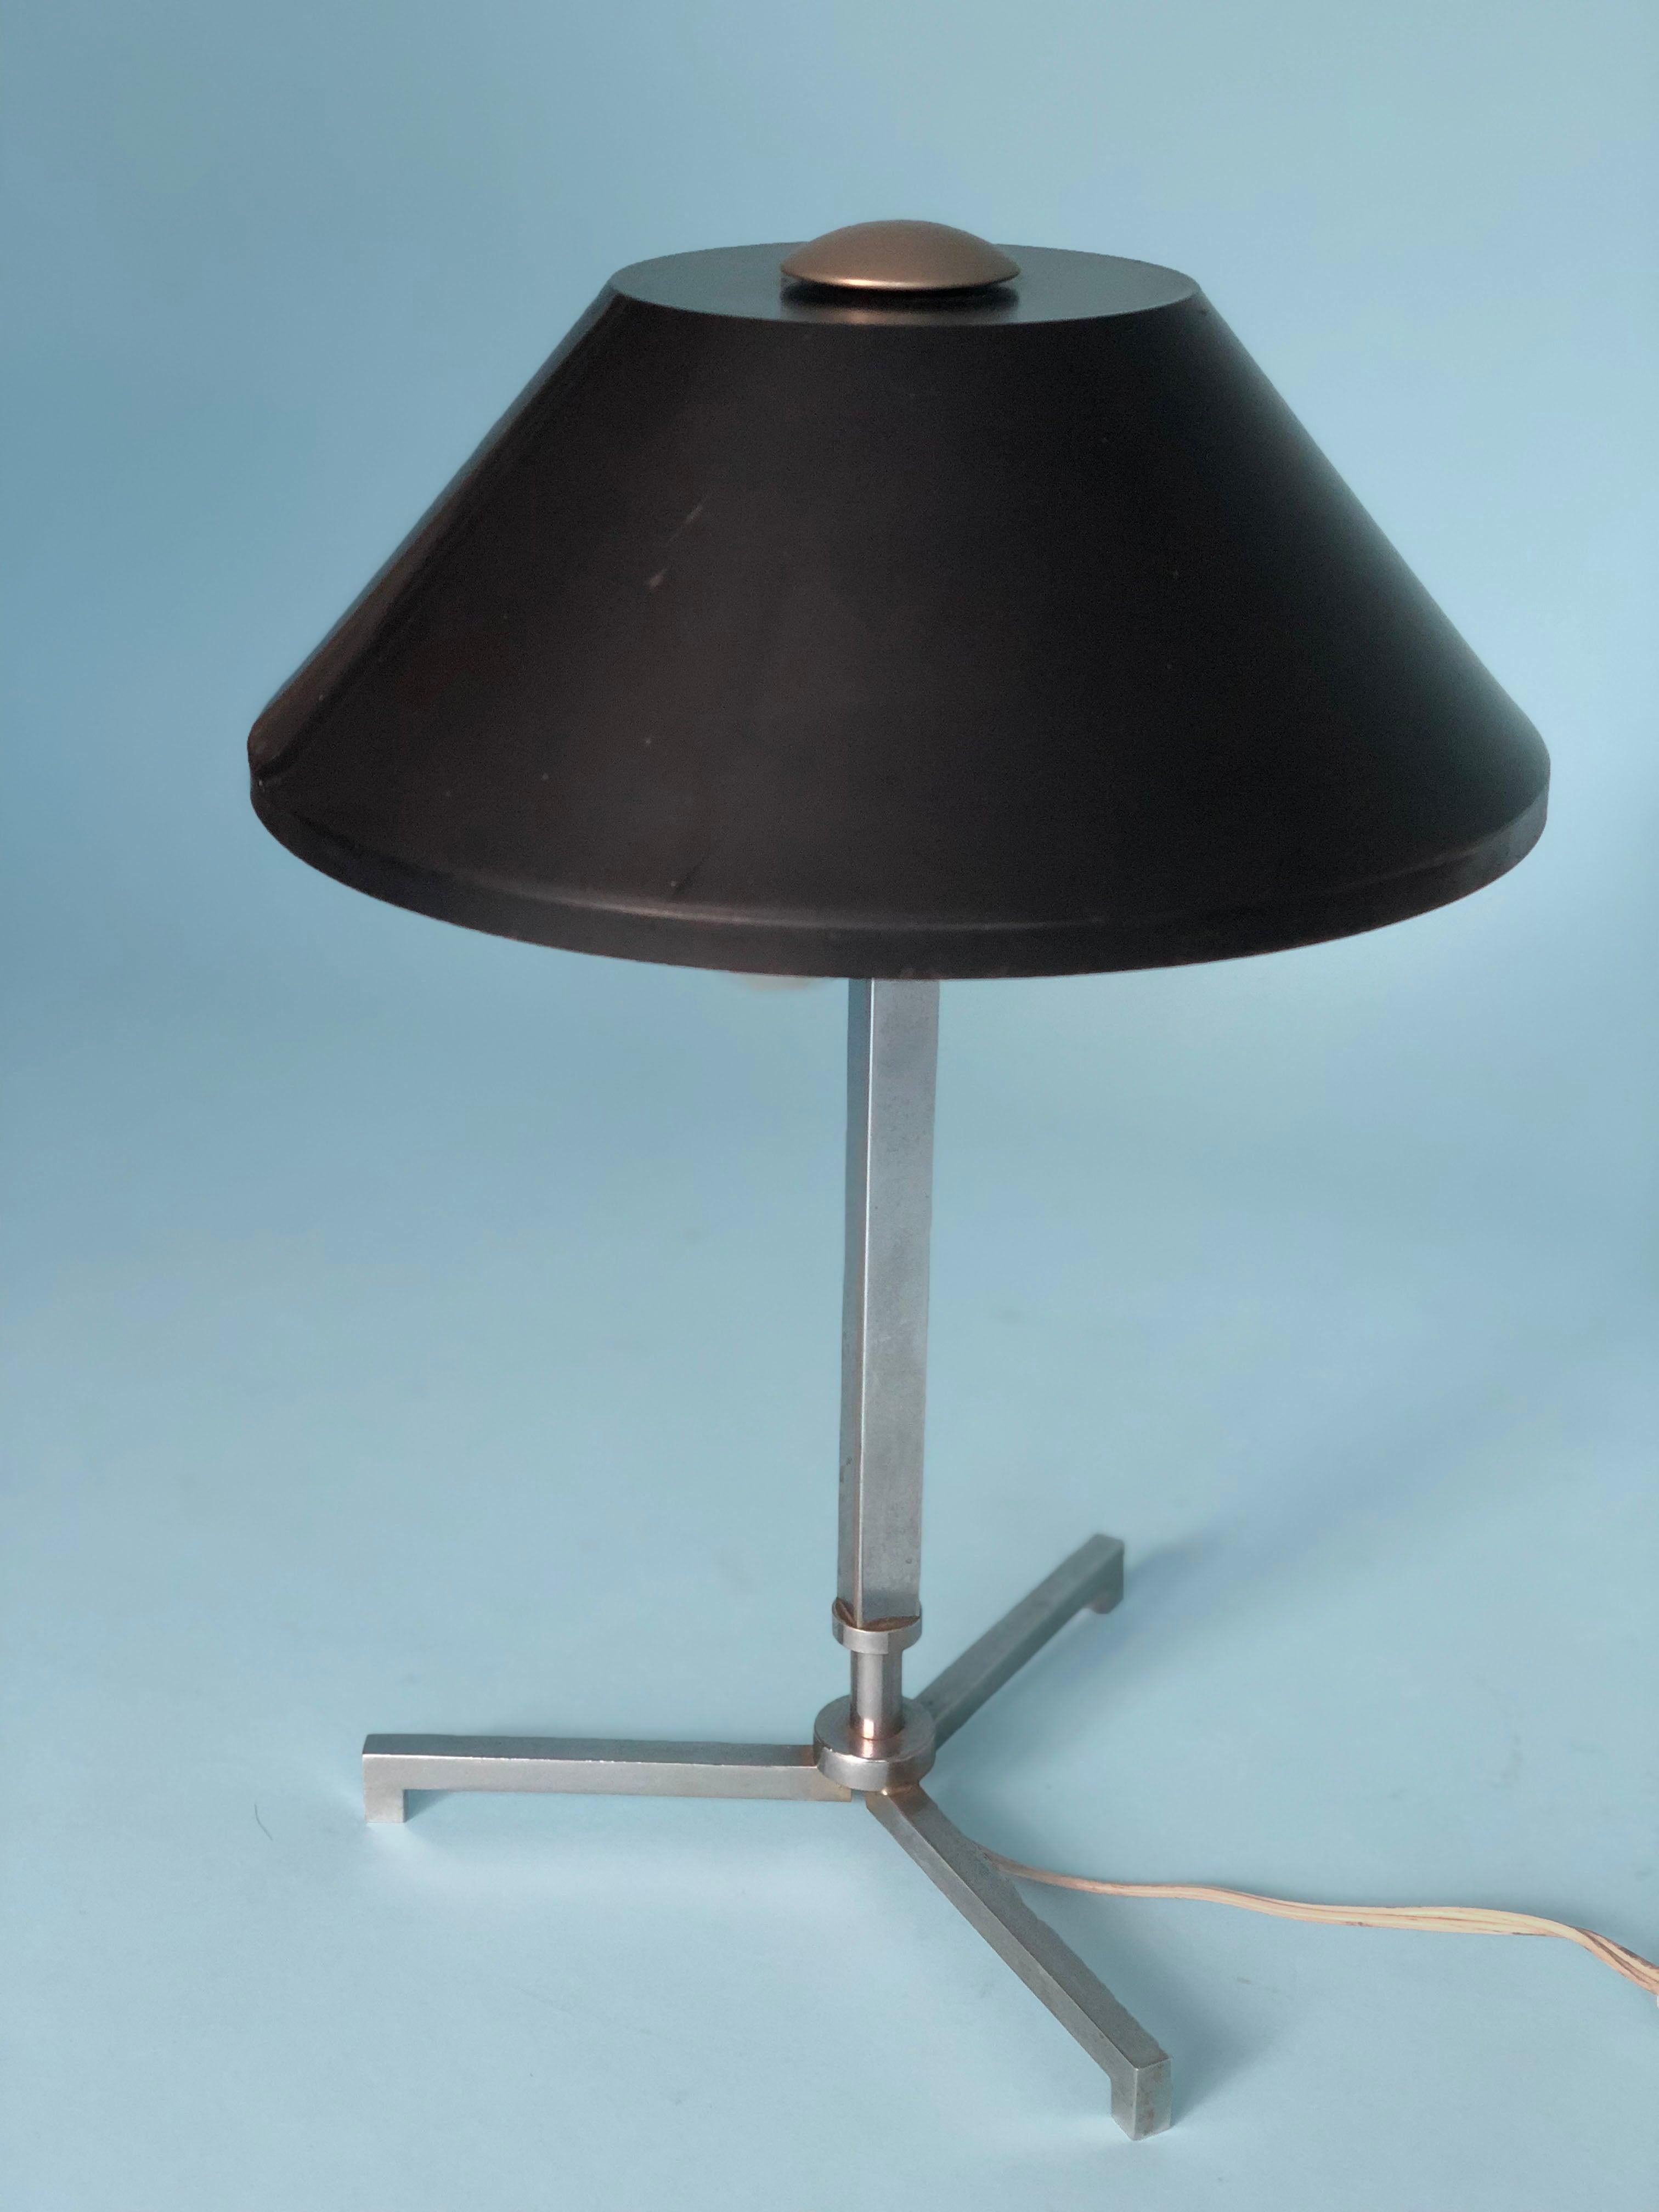 Chrome table lamp by Jo Hammerborg from Denmark 1960s. The lamp has 2 bulbs, a chrome 3 legs base and a metal black shade. In good vintage condition.

Designer: Jo Hammerborg for Fog & Mørup
Style: Mid century Modern
Period: 1960
Country of origin: